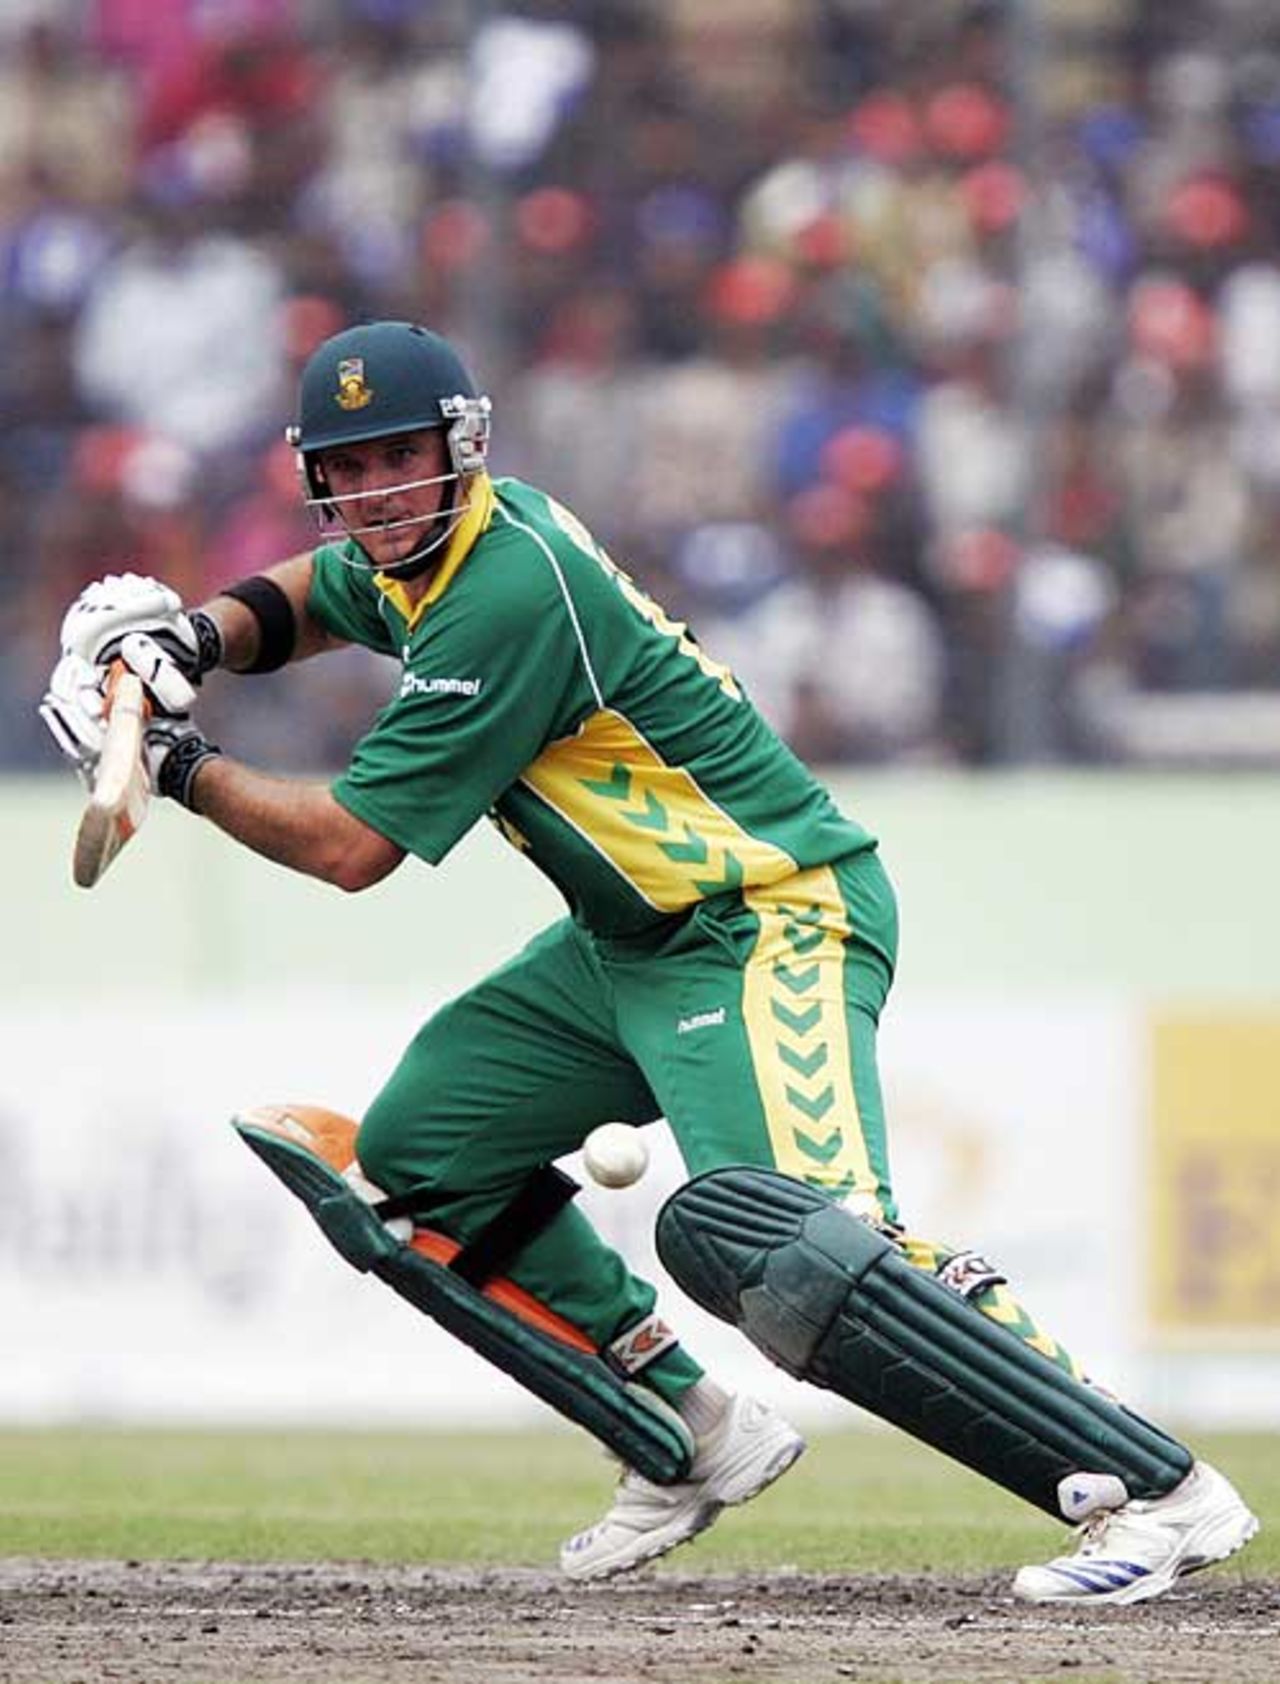 Graeme Smith steered South Africa to a sweep, Bangladesh v South Africa, 3rd ODI, Mirpur, March 14, 2008 
